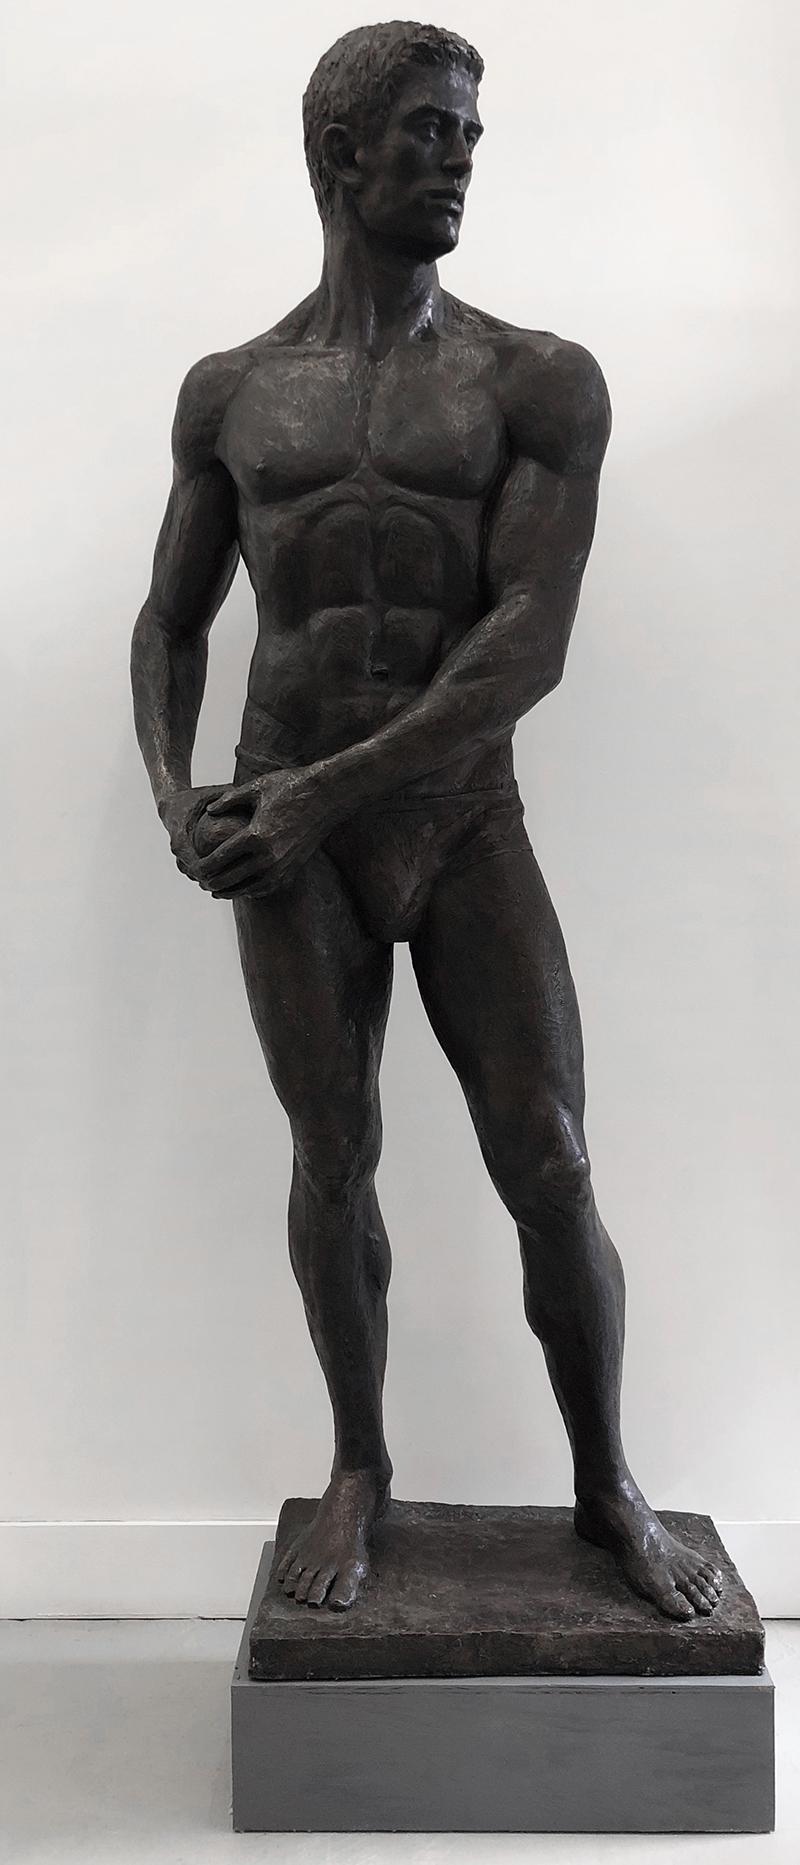 [Bruce Sargeant (1898-1938)] Statue of an Athlete - Sculpture by Mark Beard